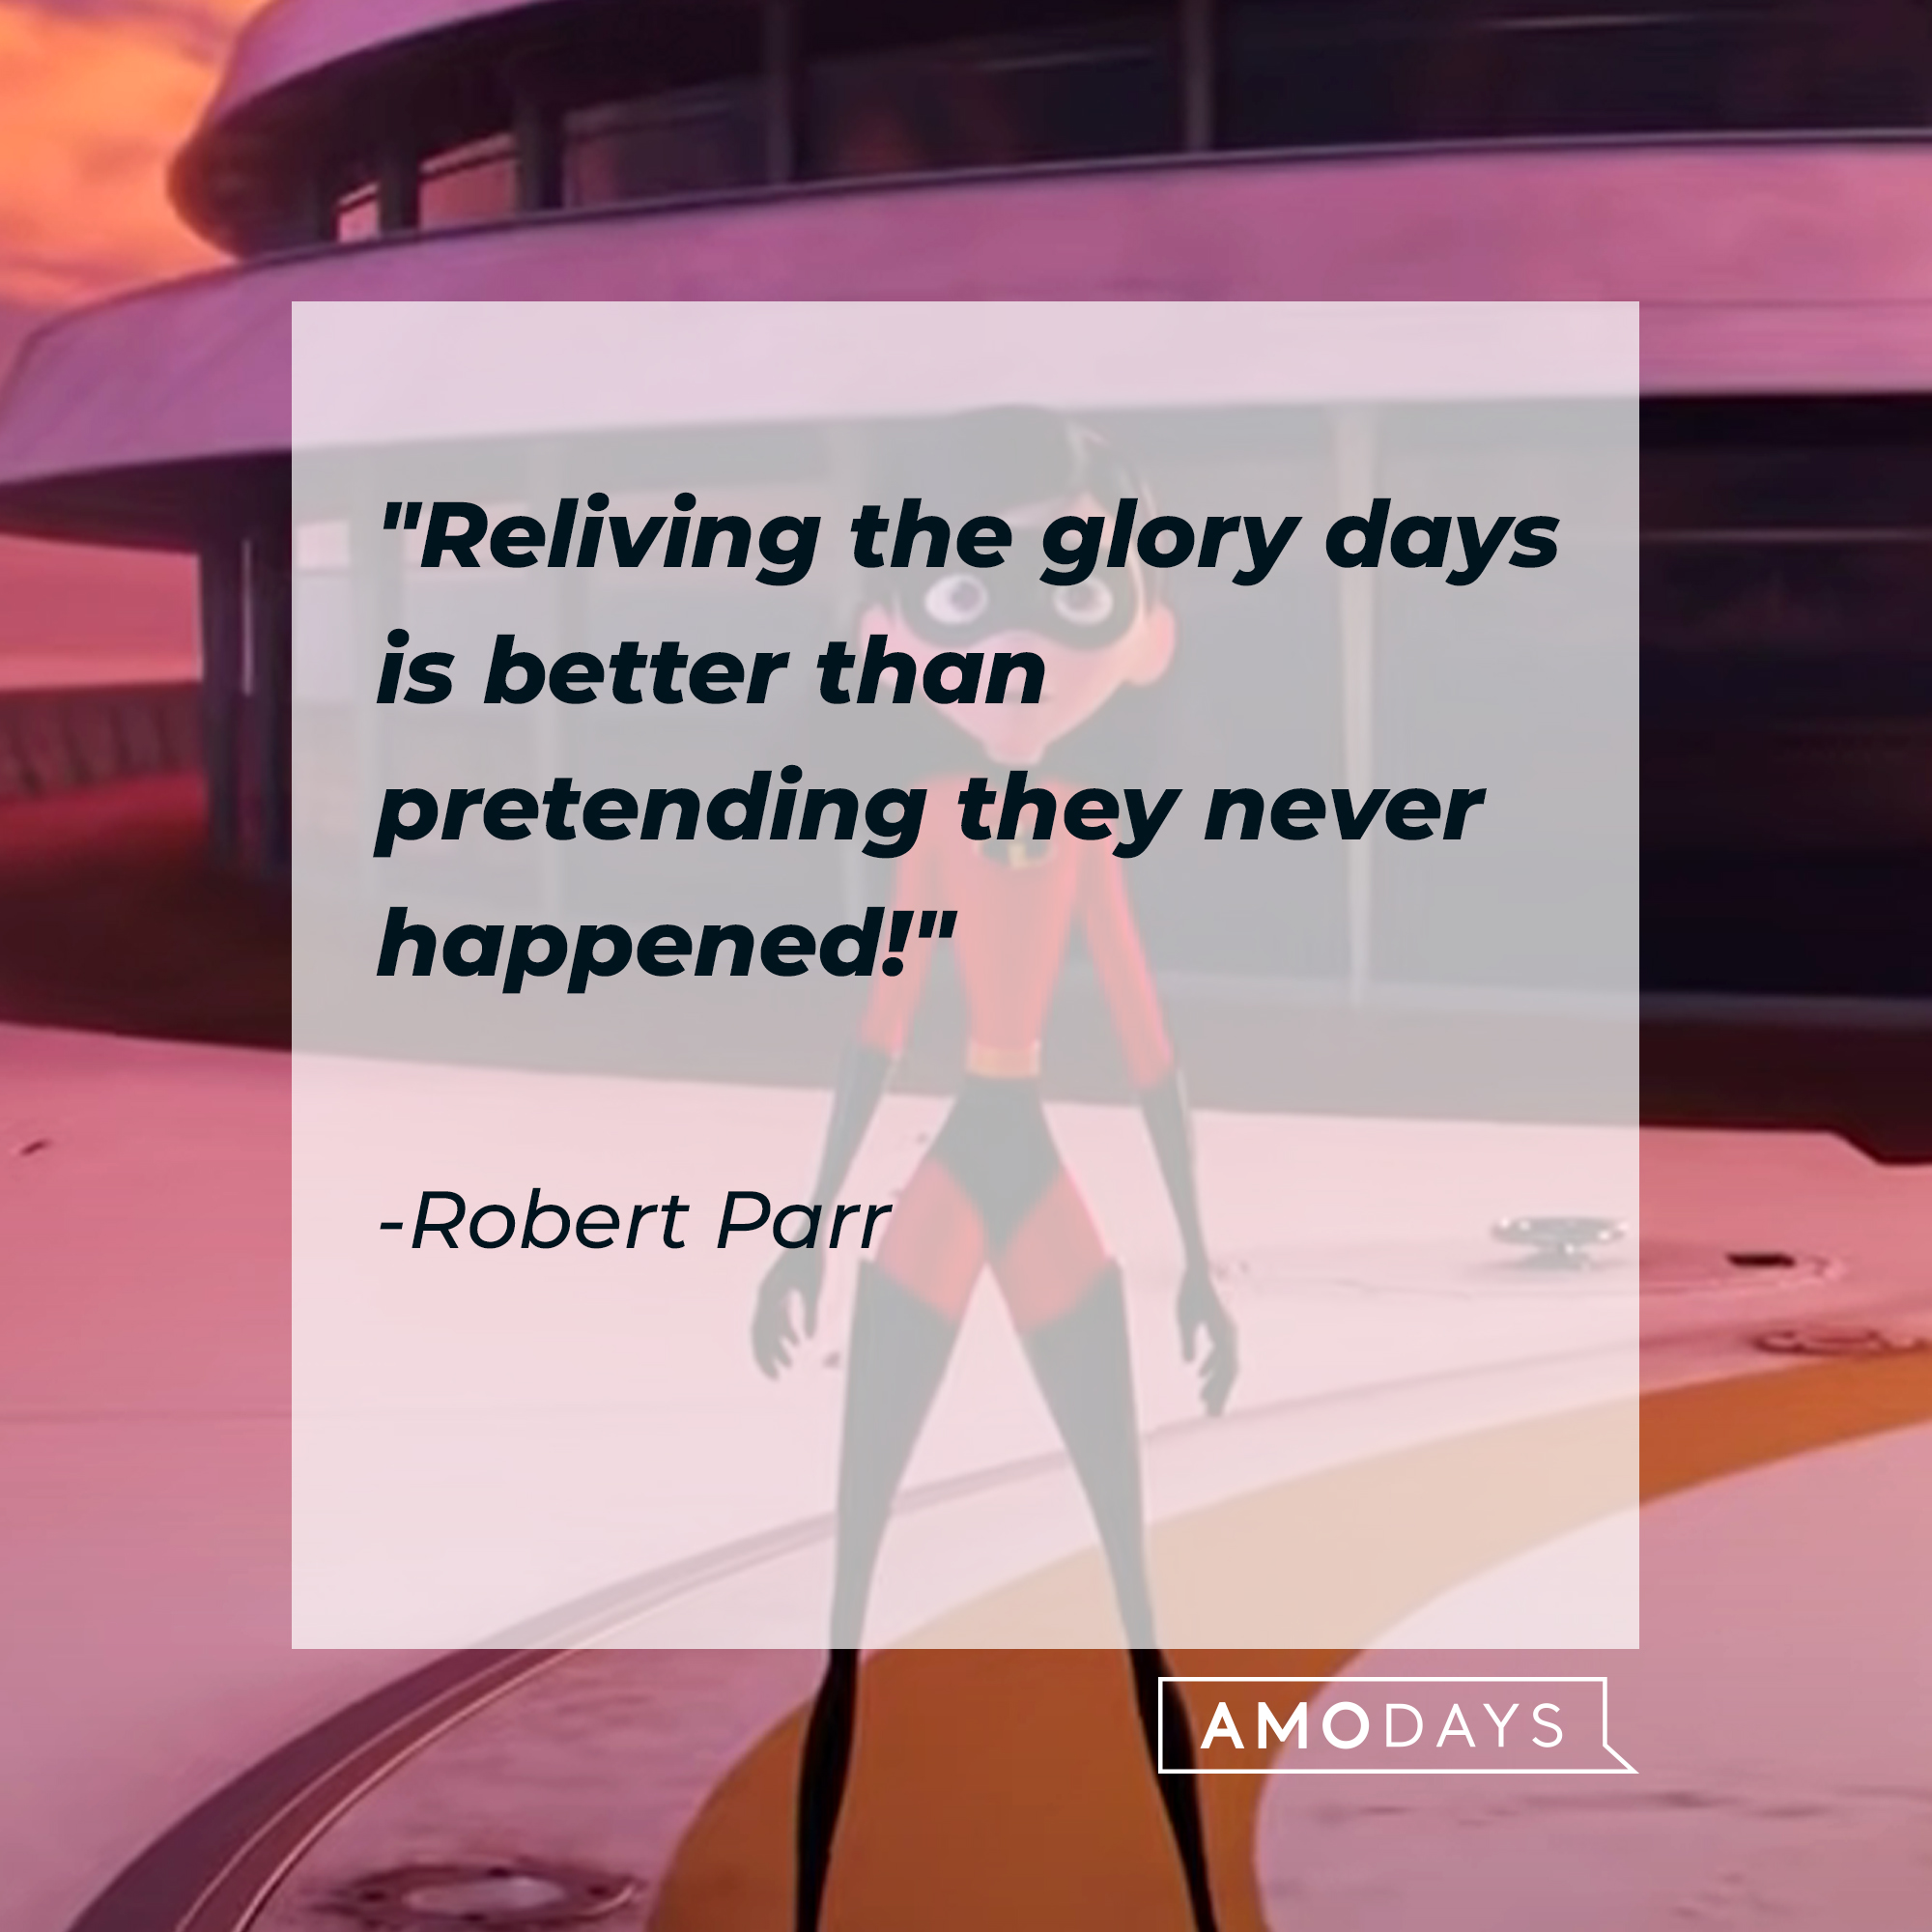 Helen Parr with Robert Parr's quote: "Reliving the glory days is better than pretending they never happened!" | Source: Youtube/pixar